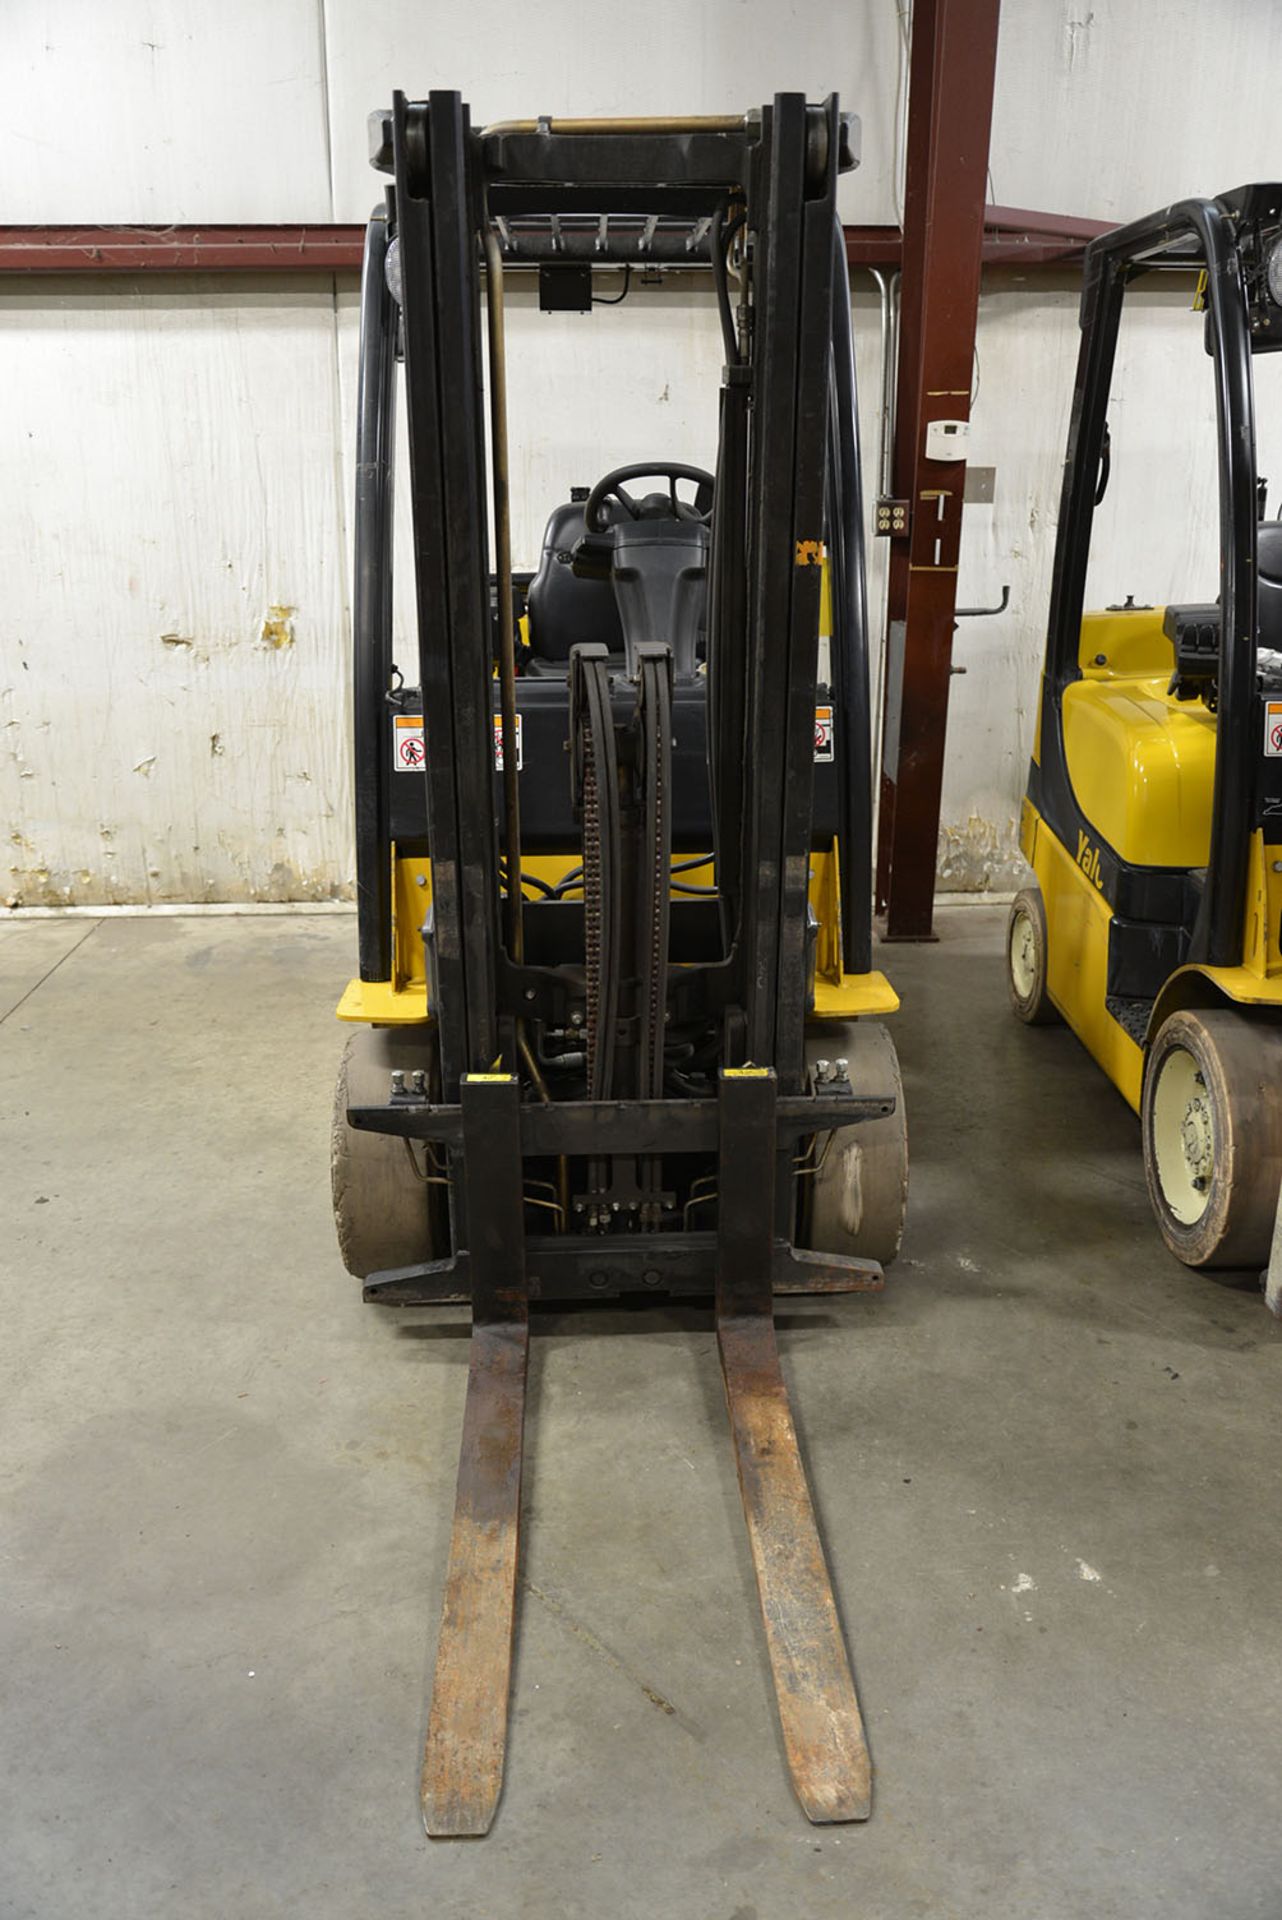 2008 YALE 5,000-lb. Capacity Forklift, Model GLC050VXNV, S/N A910V13919F, LPG, Solid Non-Marking - Image 2 of 6